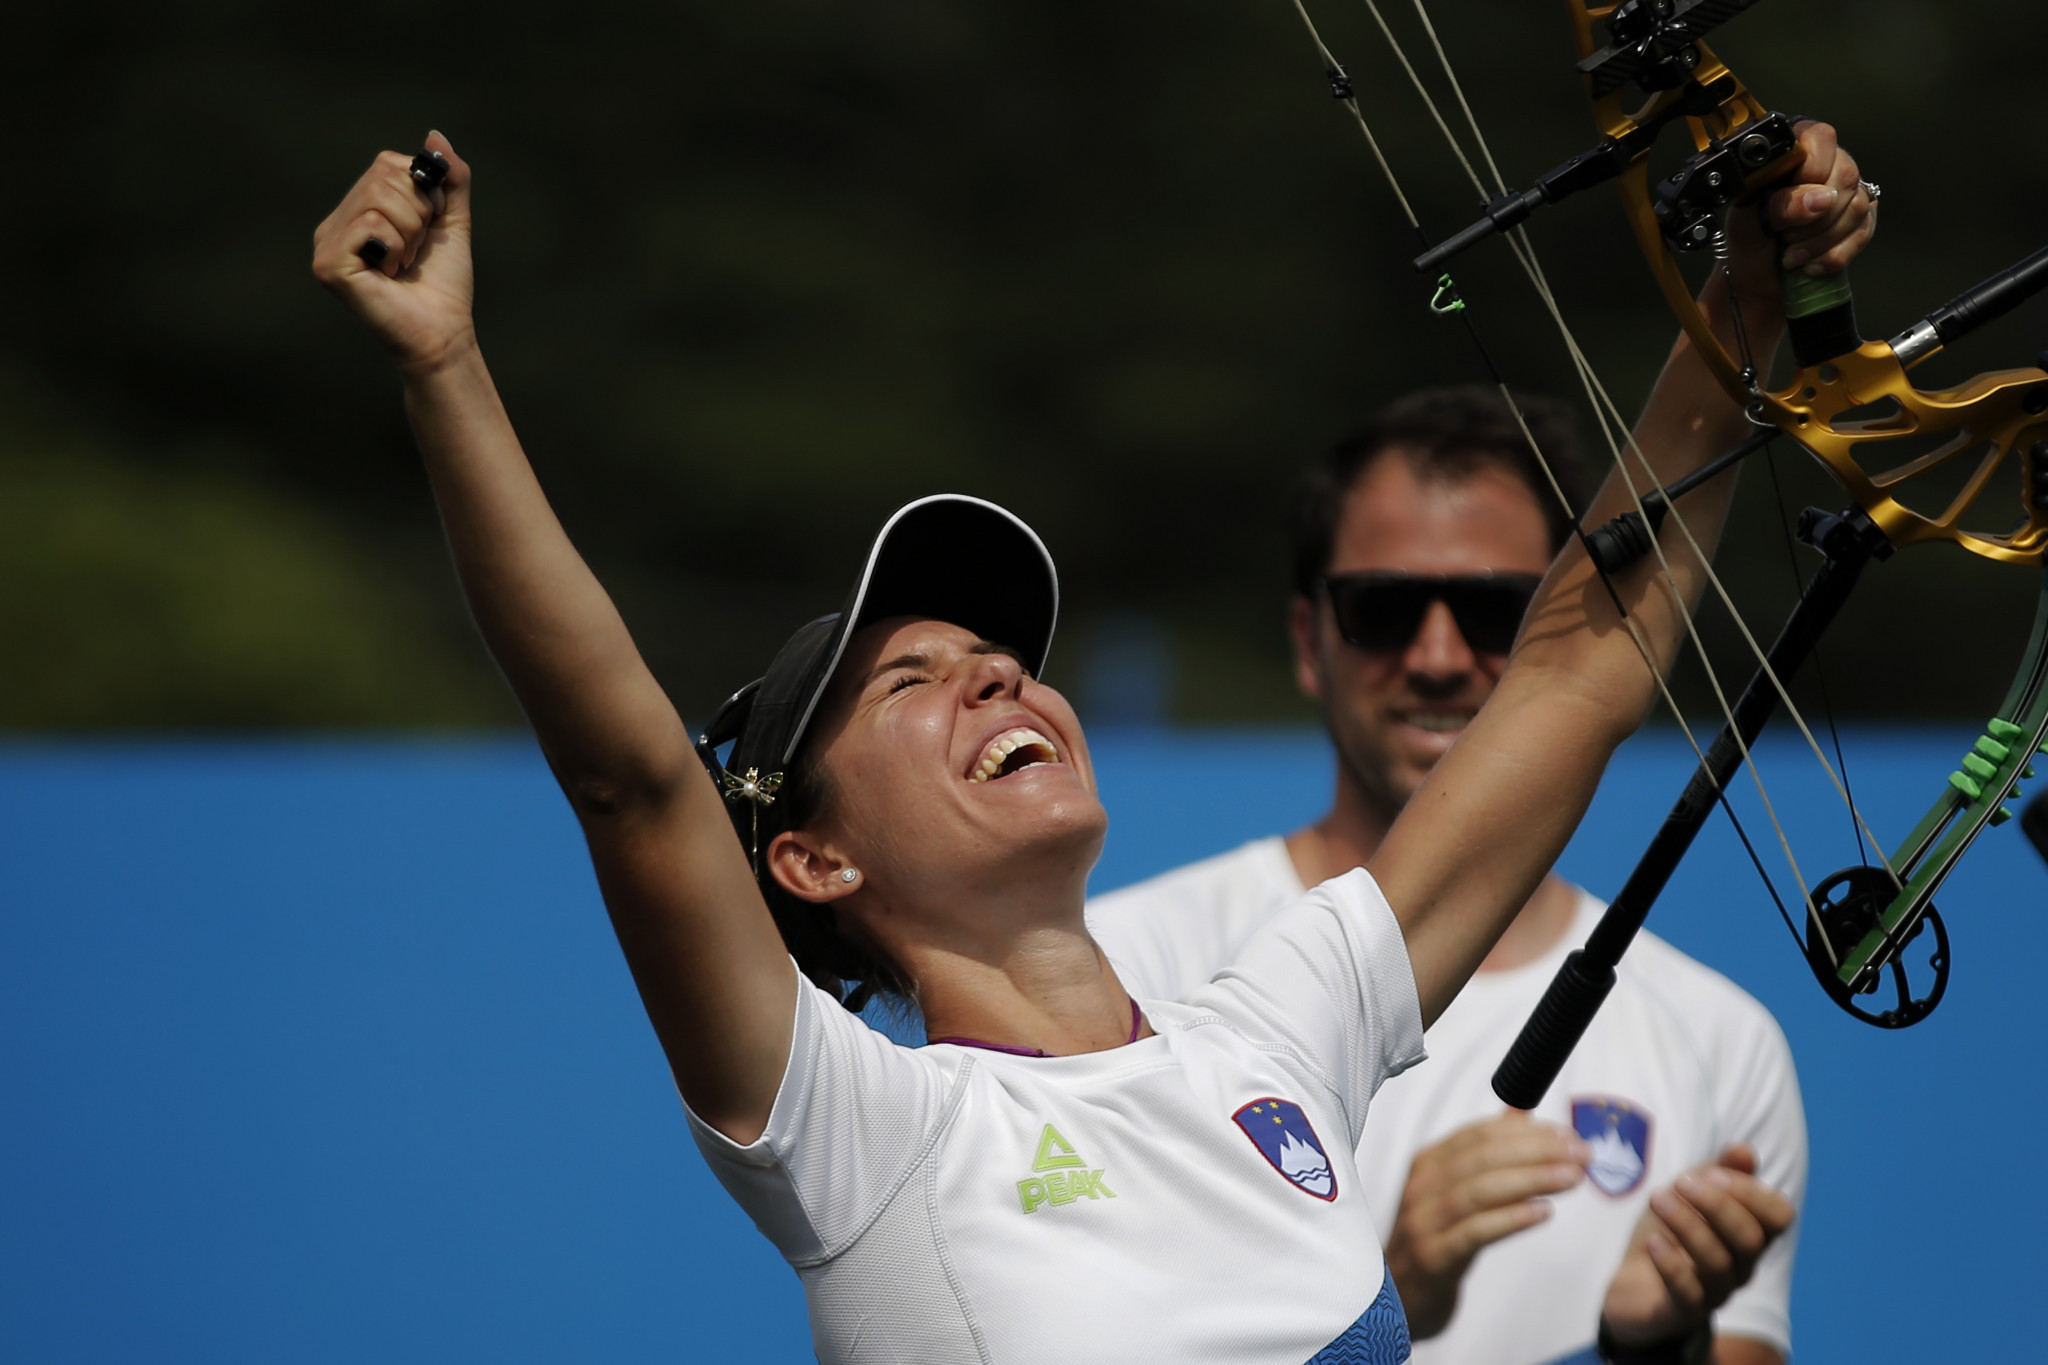 Slovenia's Toja Ellison celebrates European Games victory in Minsk in the women's recurve ©Getty Images